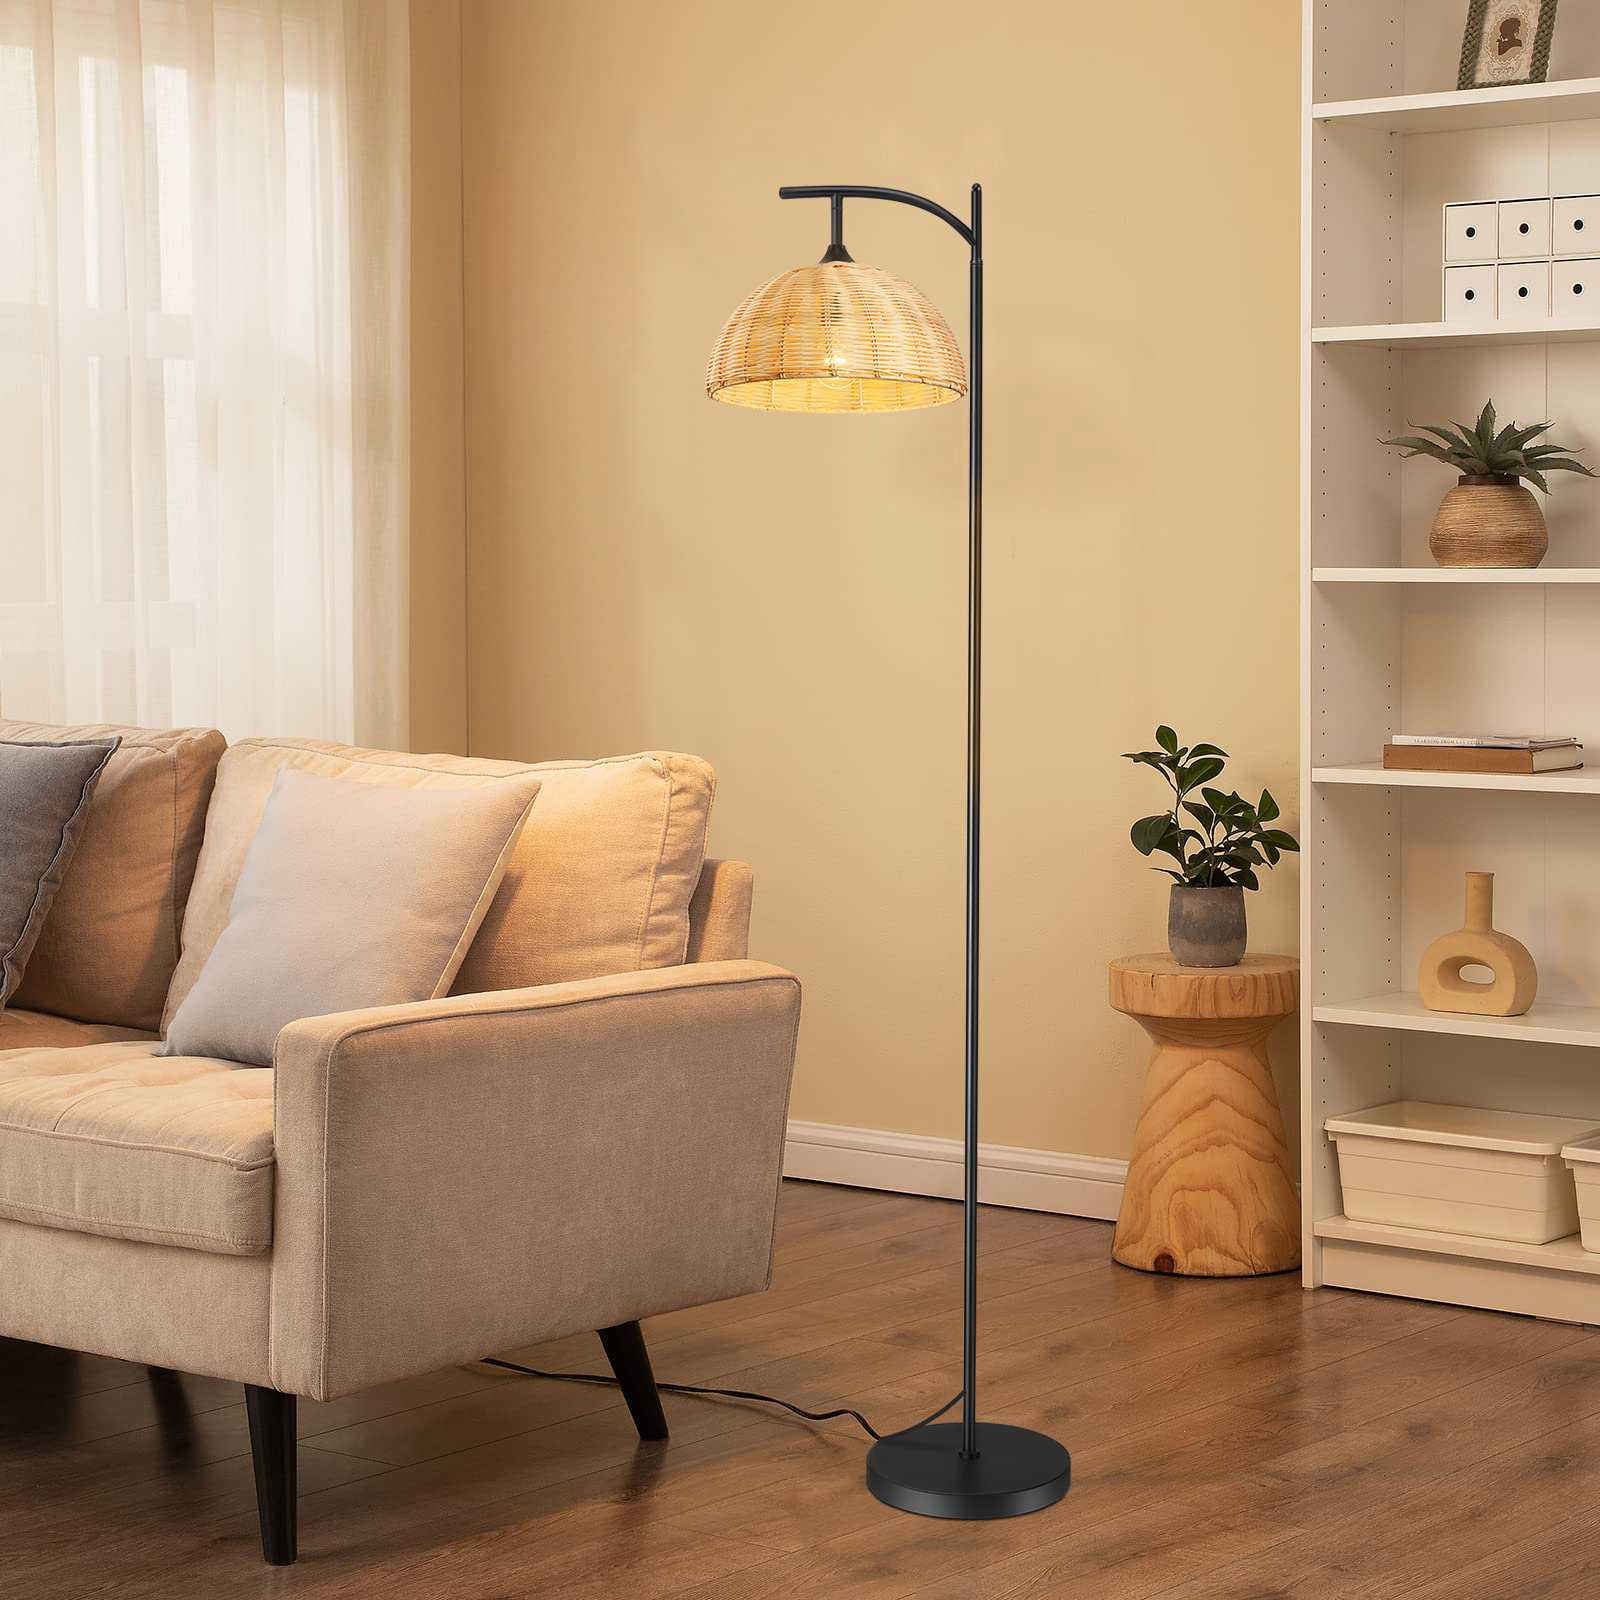 Kyeria Arc/Arched Floor Lamp with Remote Control and Smart Bulb Included Ebern Designs Base Finish: Brown